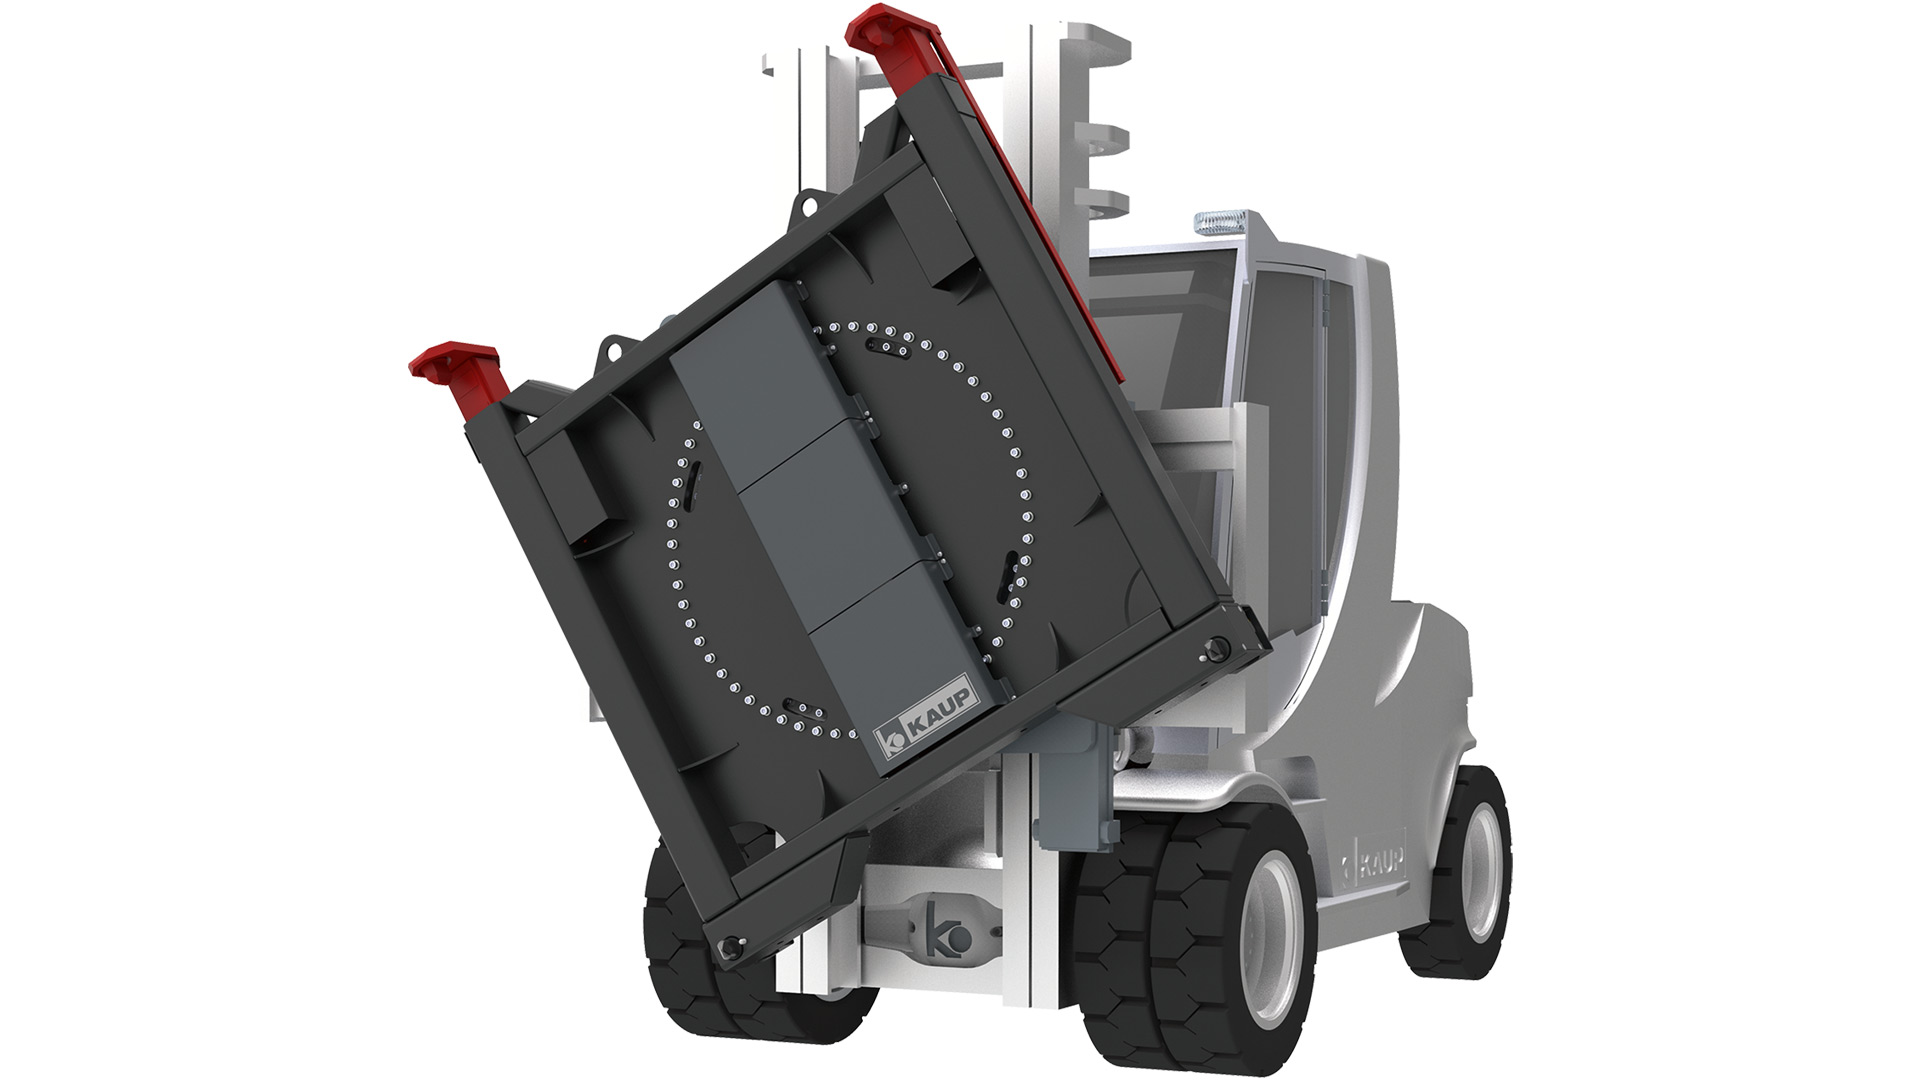 Graphic representation of a forklift truck with rotating, flat attachment and the KAUP logo